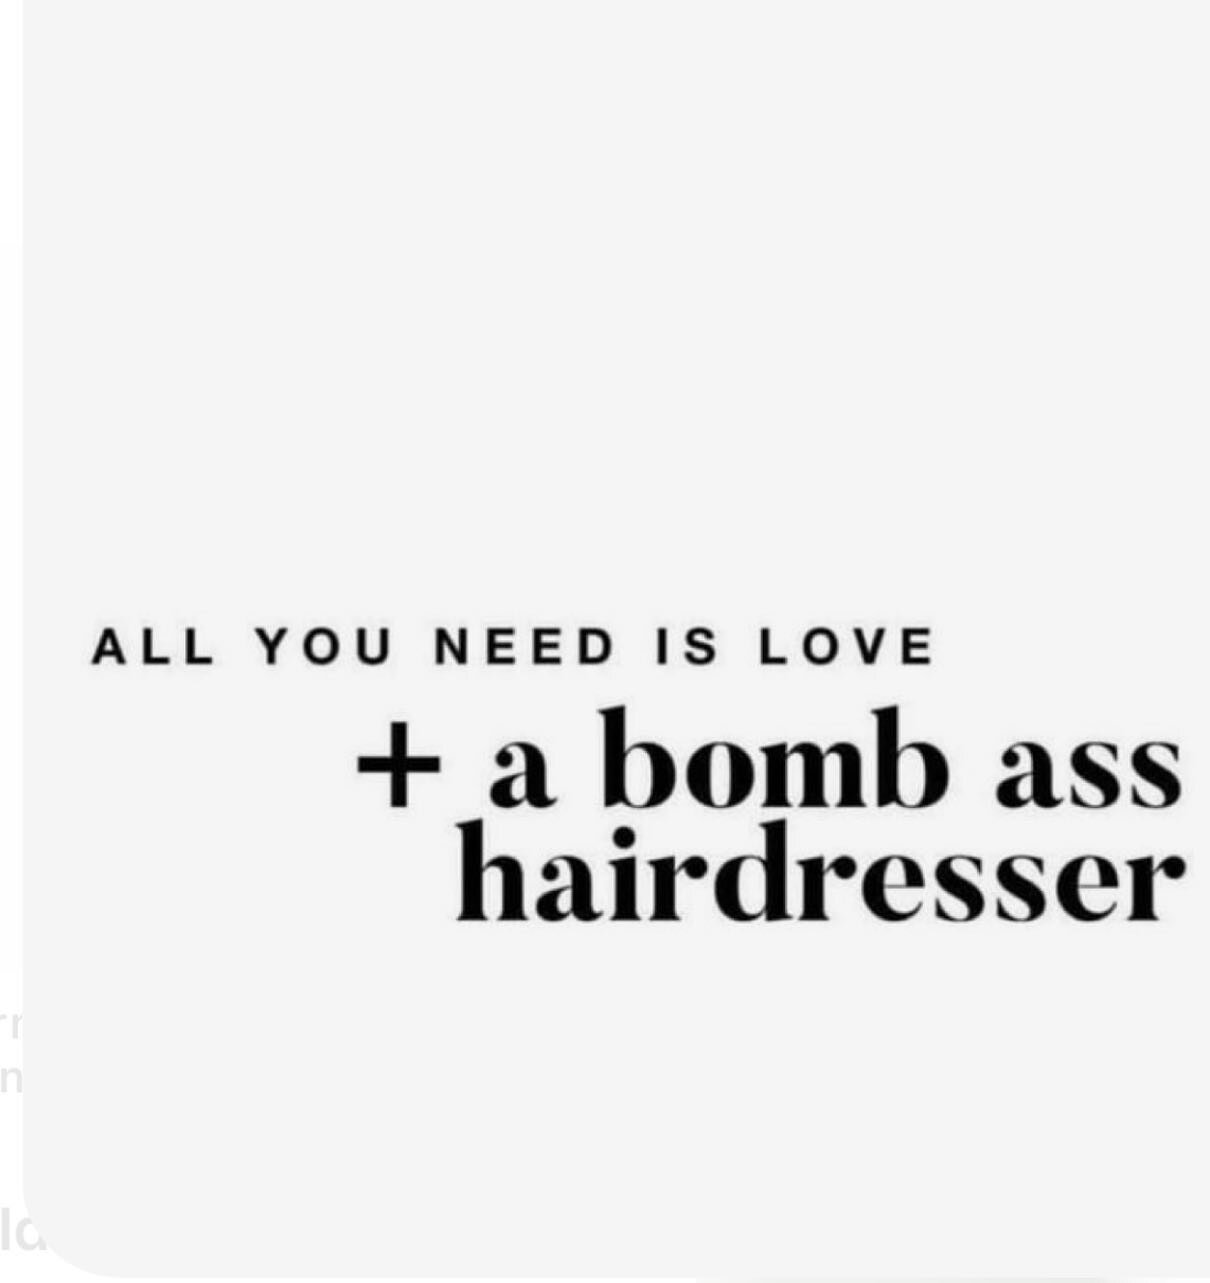 Yes &amp; yes (or maybe just a bomb ass hairdresser) 💁🏽&zwj;♀️💁🏼&zwj;♀️ 
-
-
-
#hair #melbourne #hairdresser #love #newhair #longhair #meme #fun #hairdressermagic